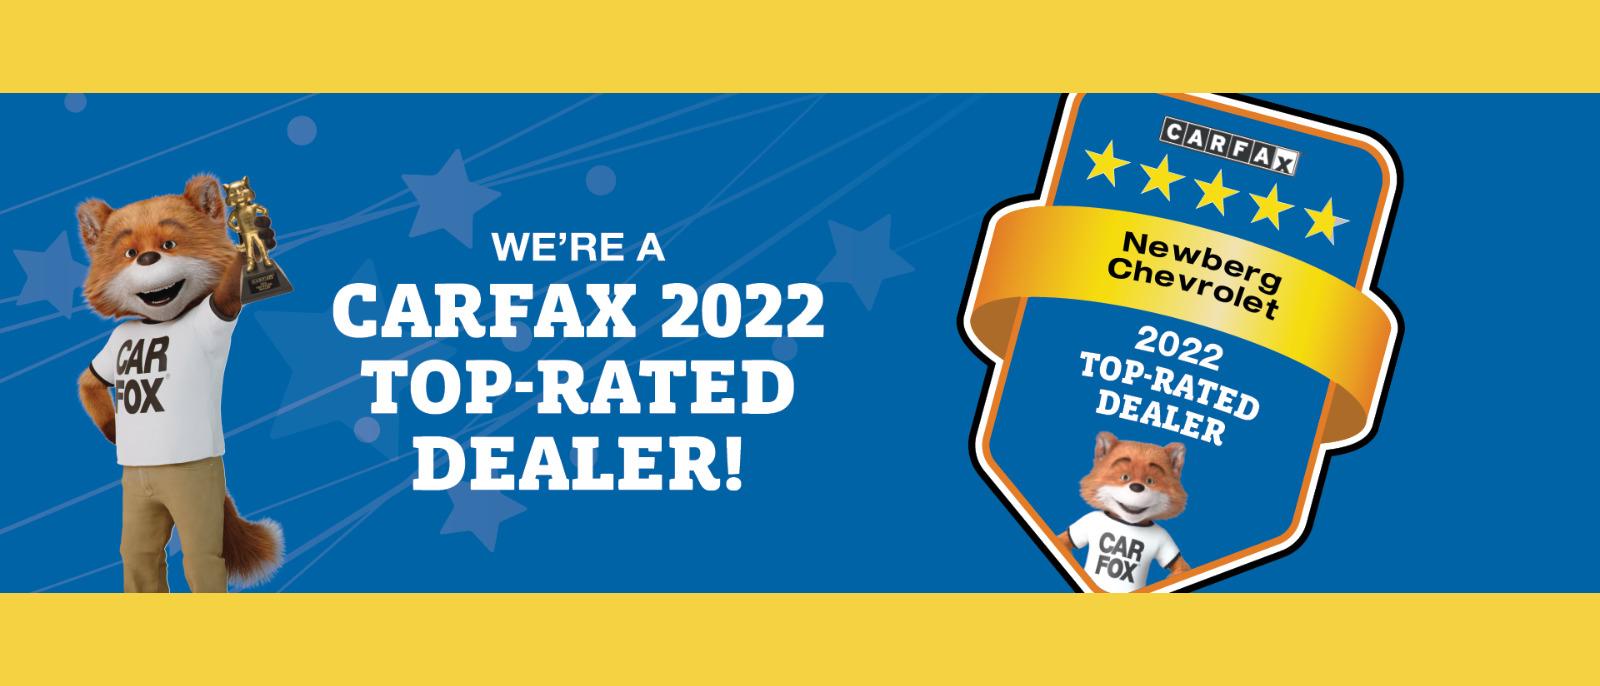 WE'RE A CARFAX 2022 TOP RATED DEALER!